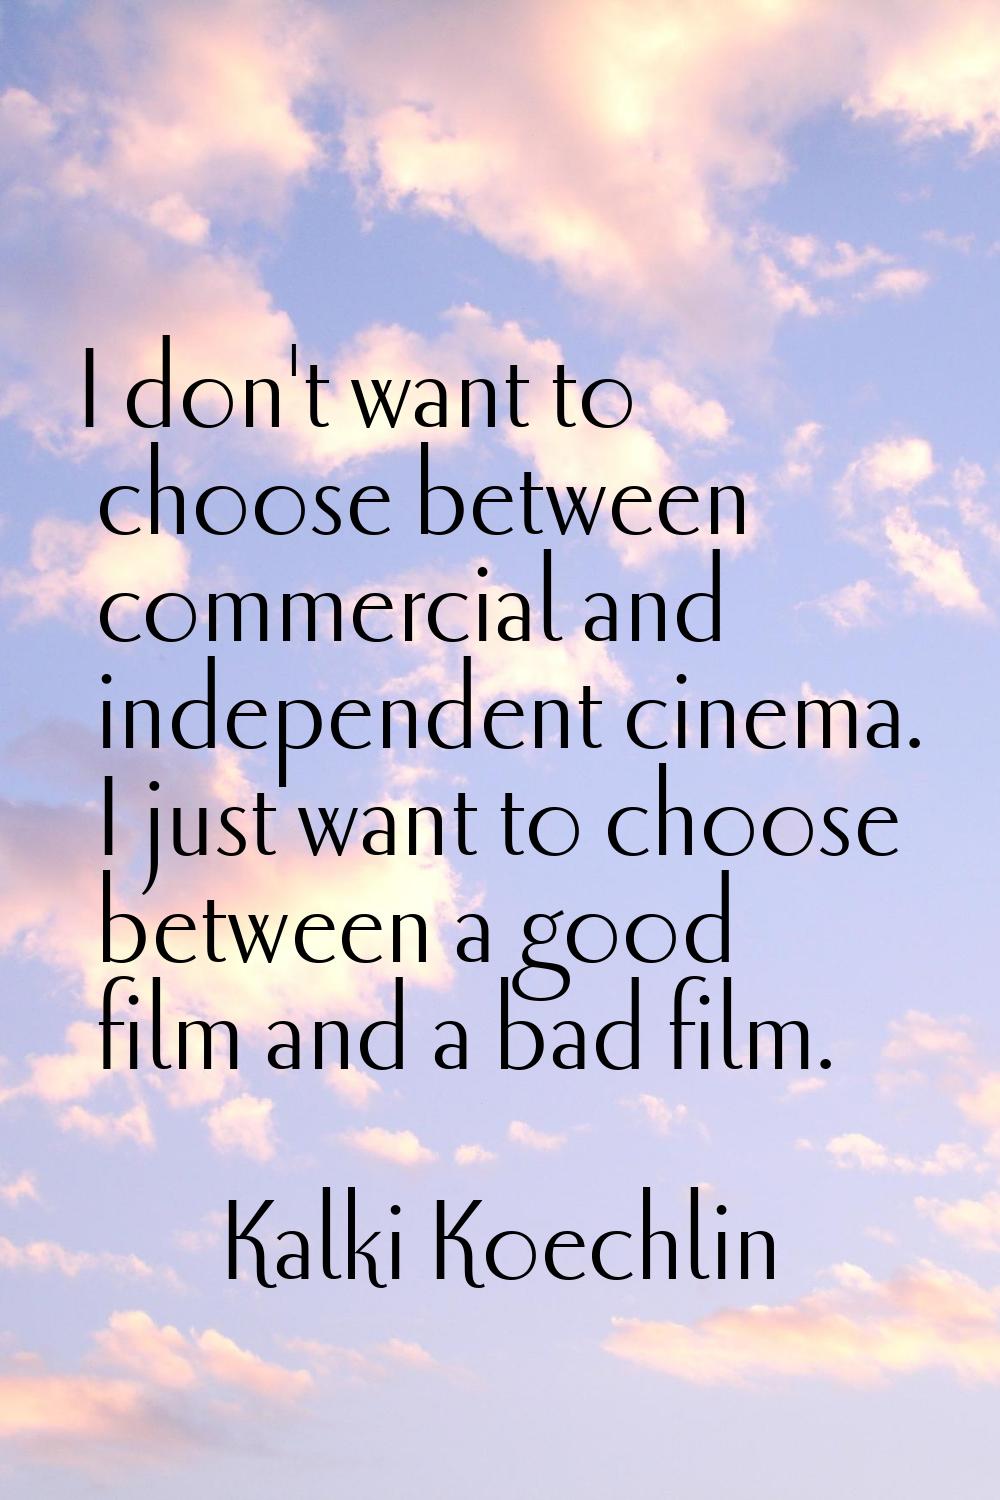 I don't want to choose between commercial and independent cinema. I just want to choose between a g